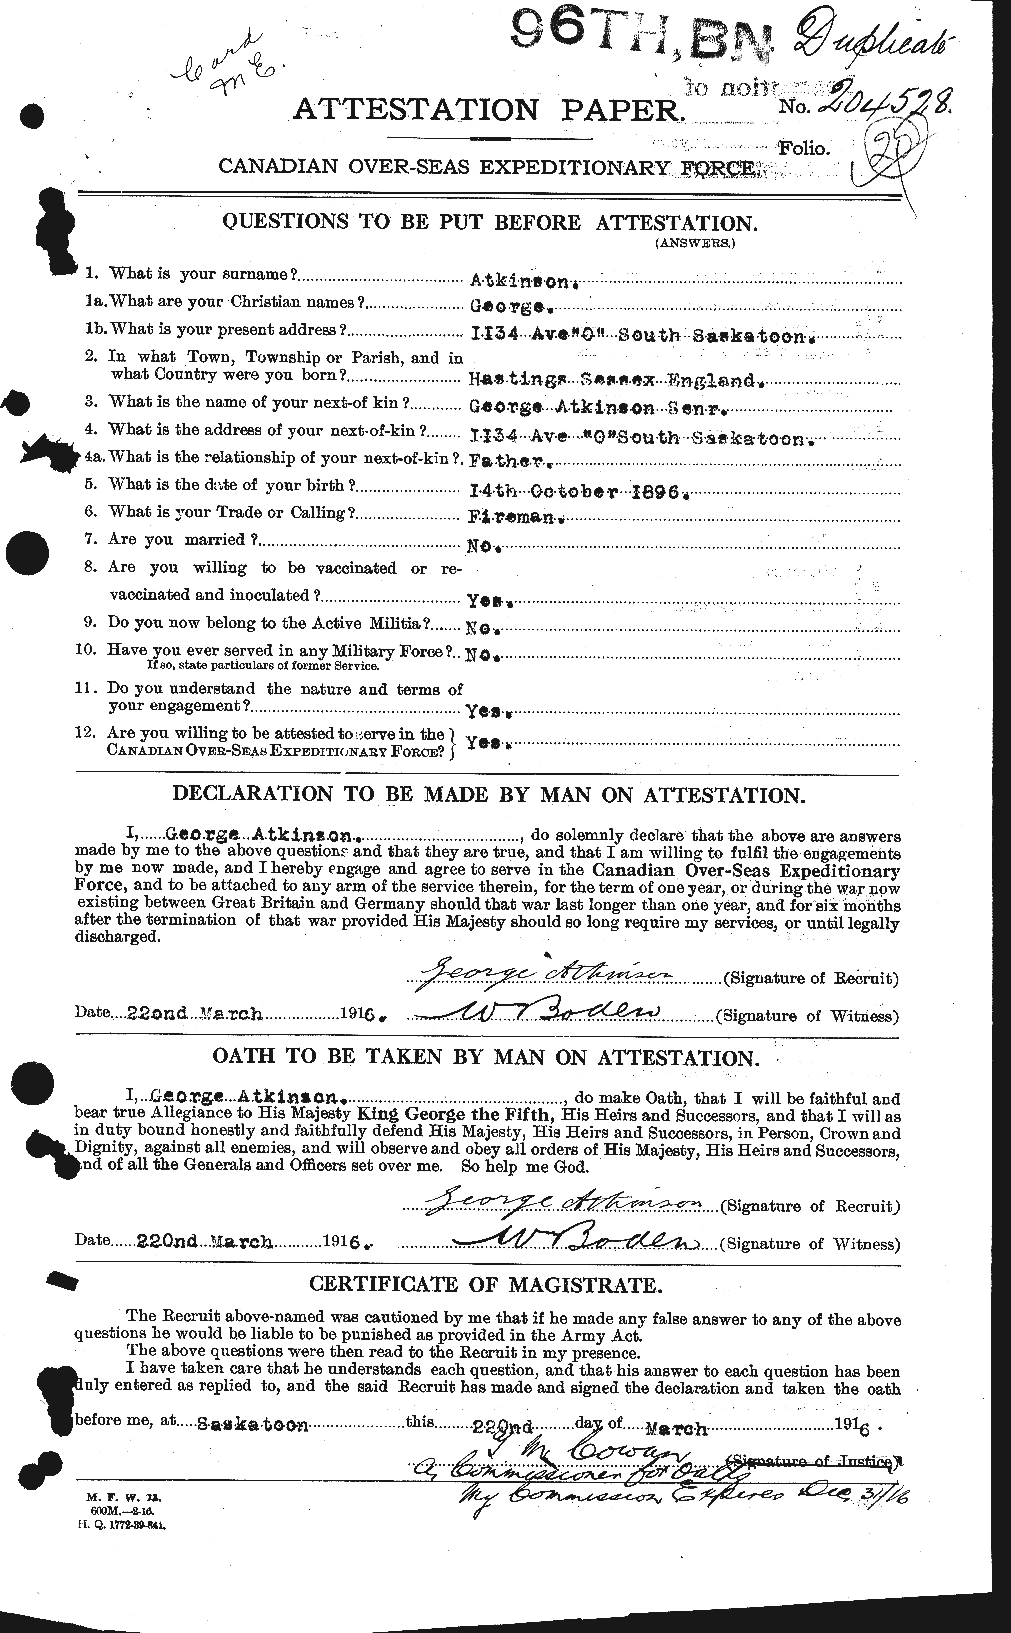 Personnel Records of the First World War - CEF 217436a